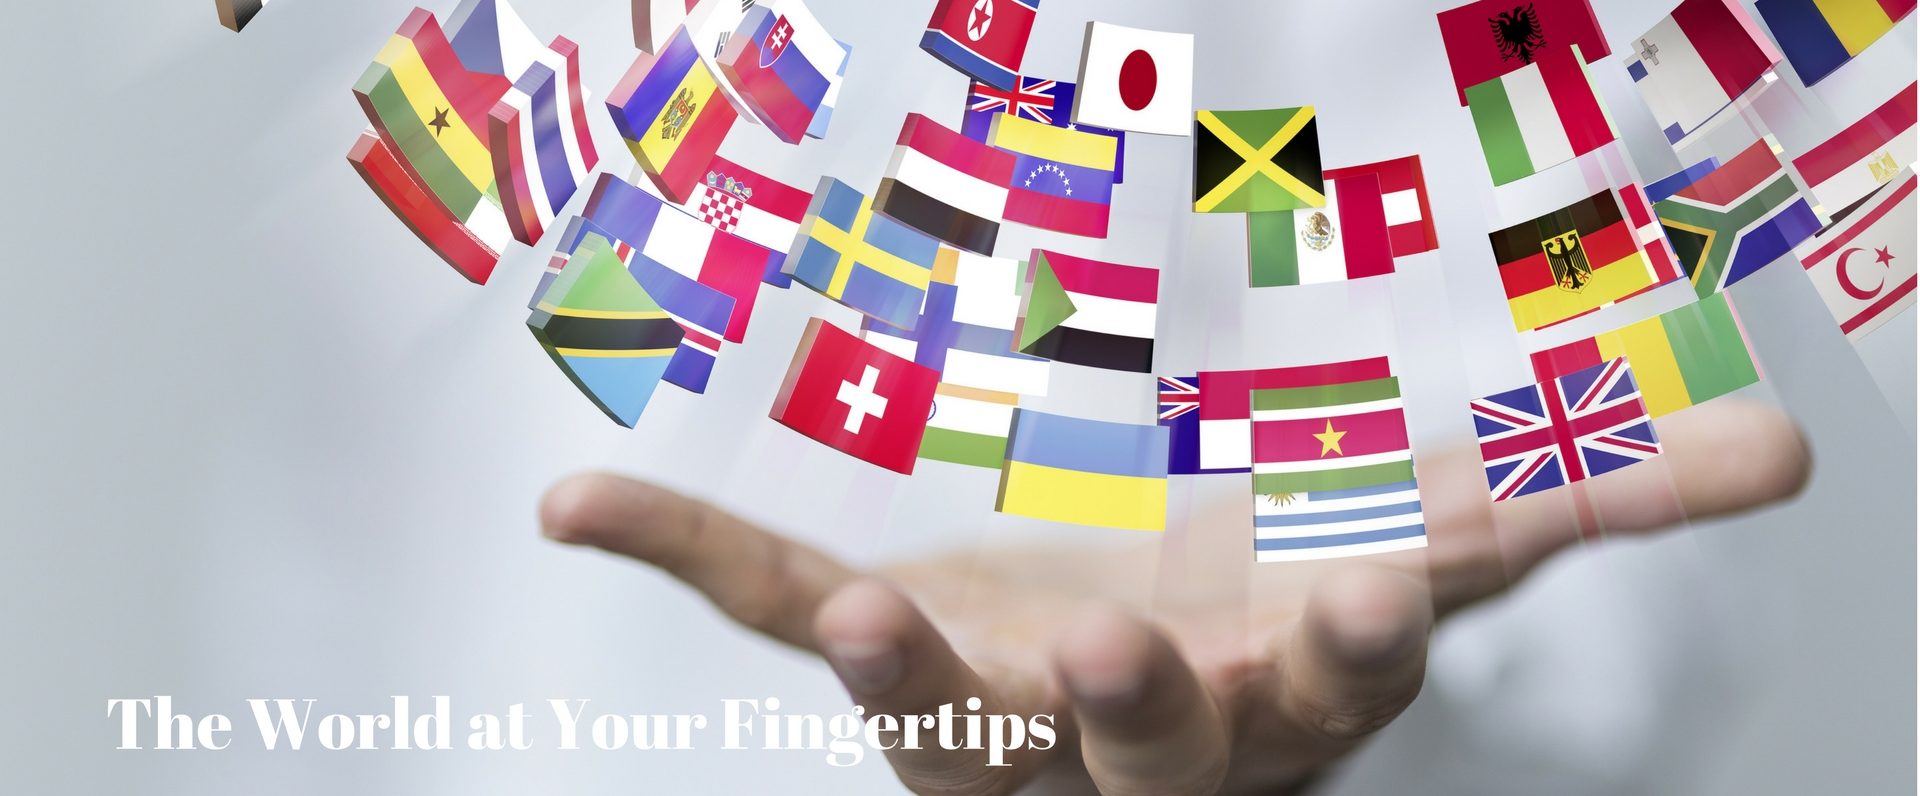 The World at Your Fingertips